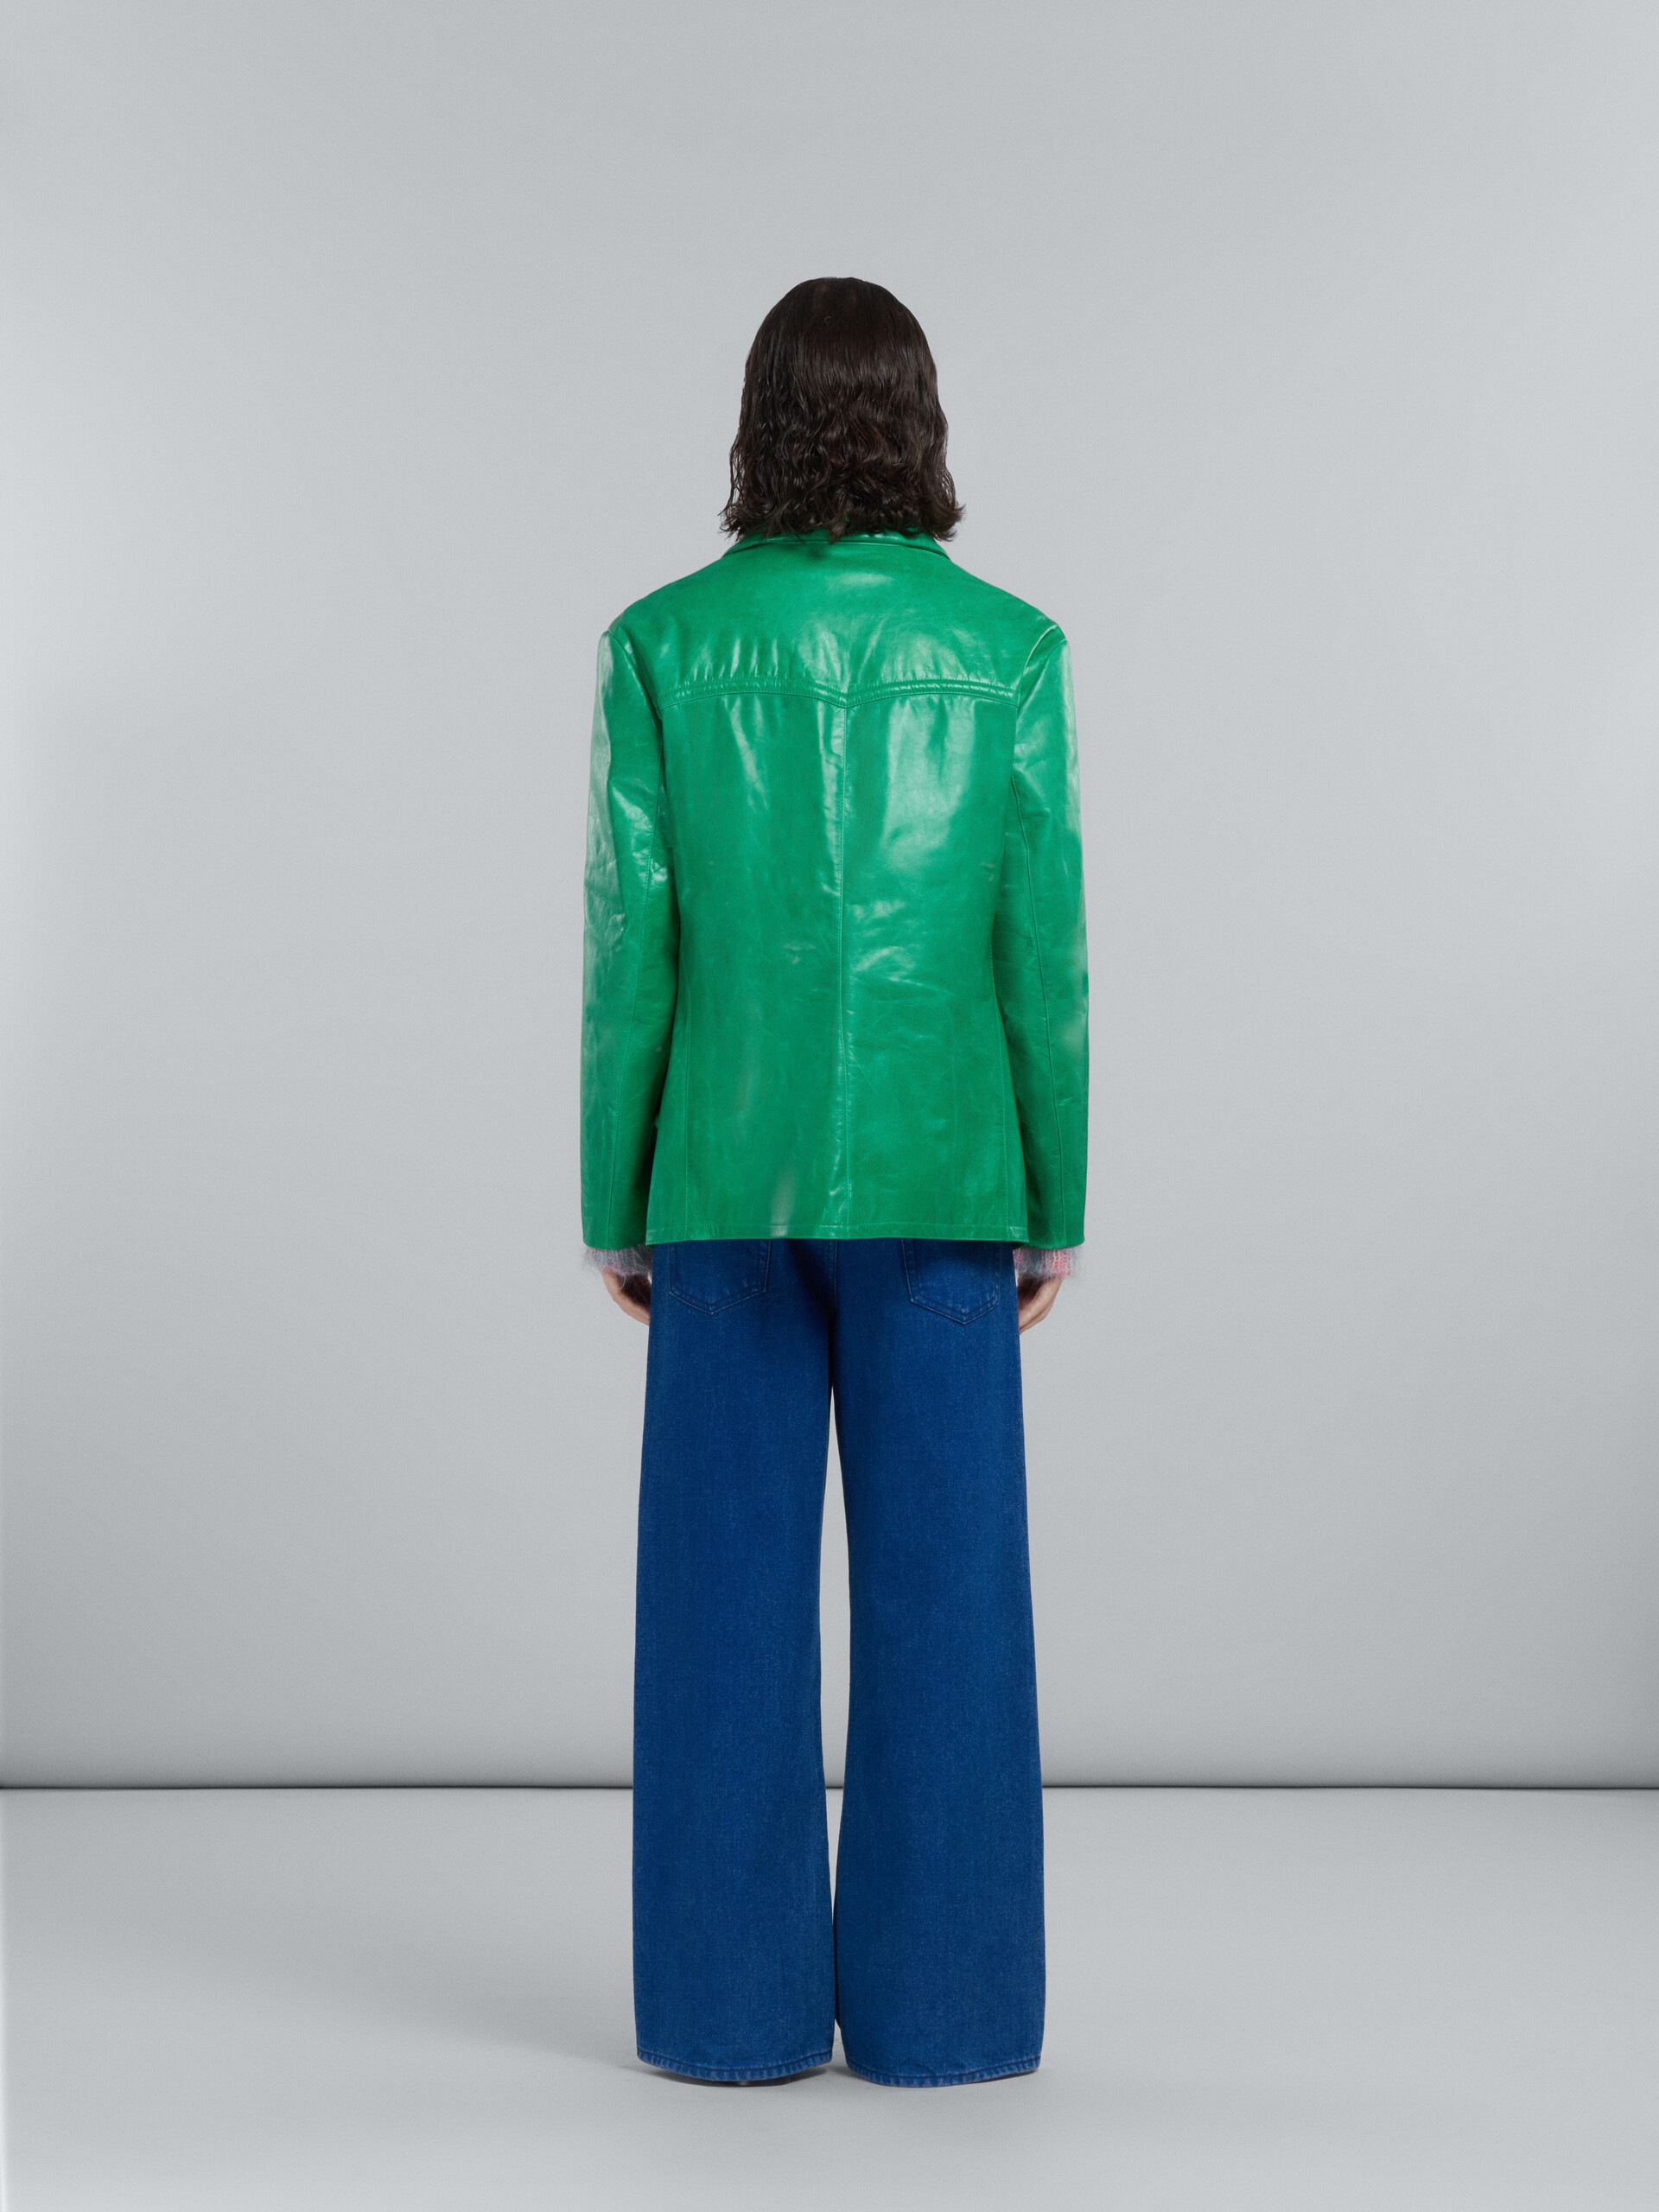 Double-breasted jacket in shiny green leather - Coat - Image 3